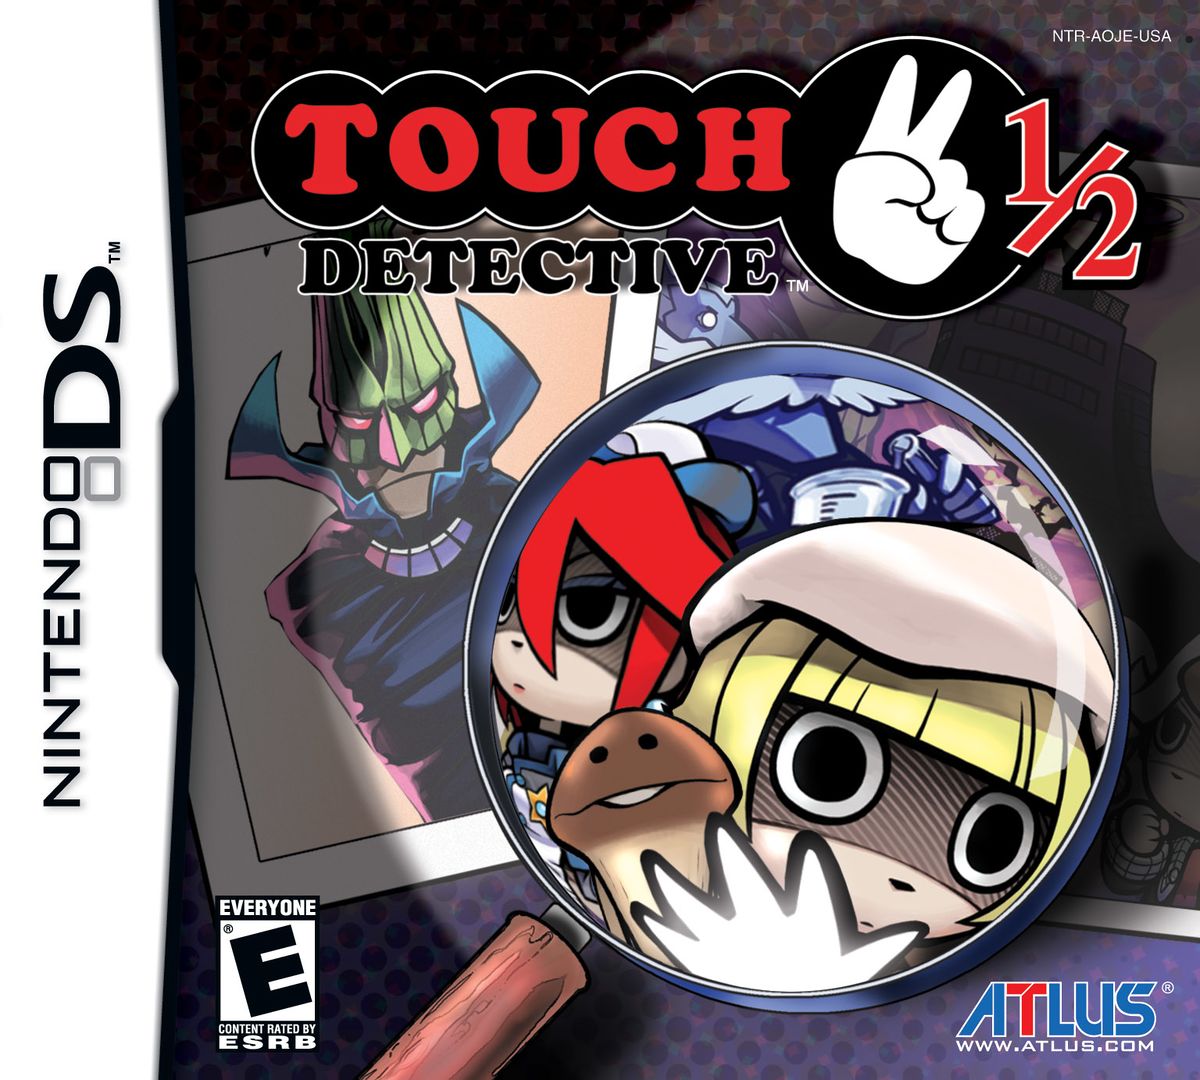 touch-detective-2-strategywiki-strategy-guide-and-game-reference-wiki